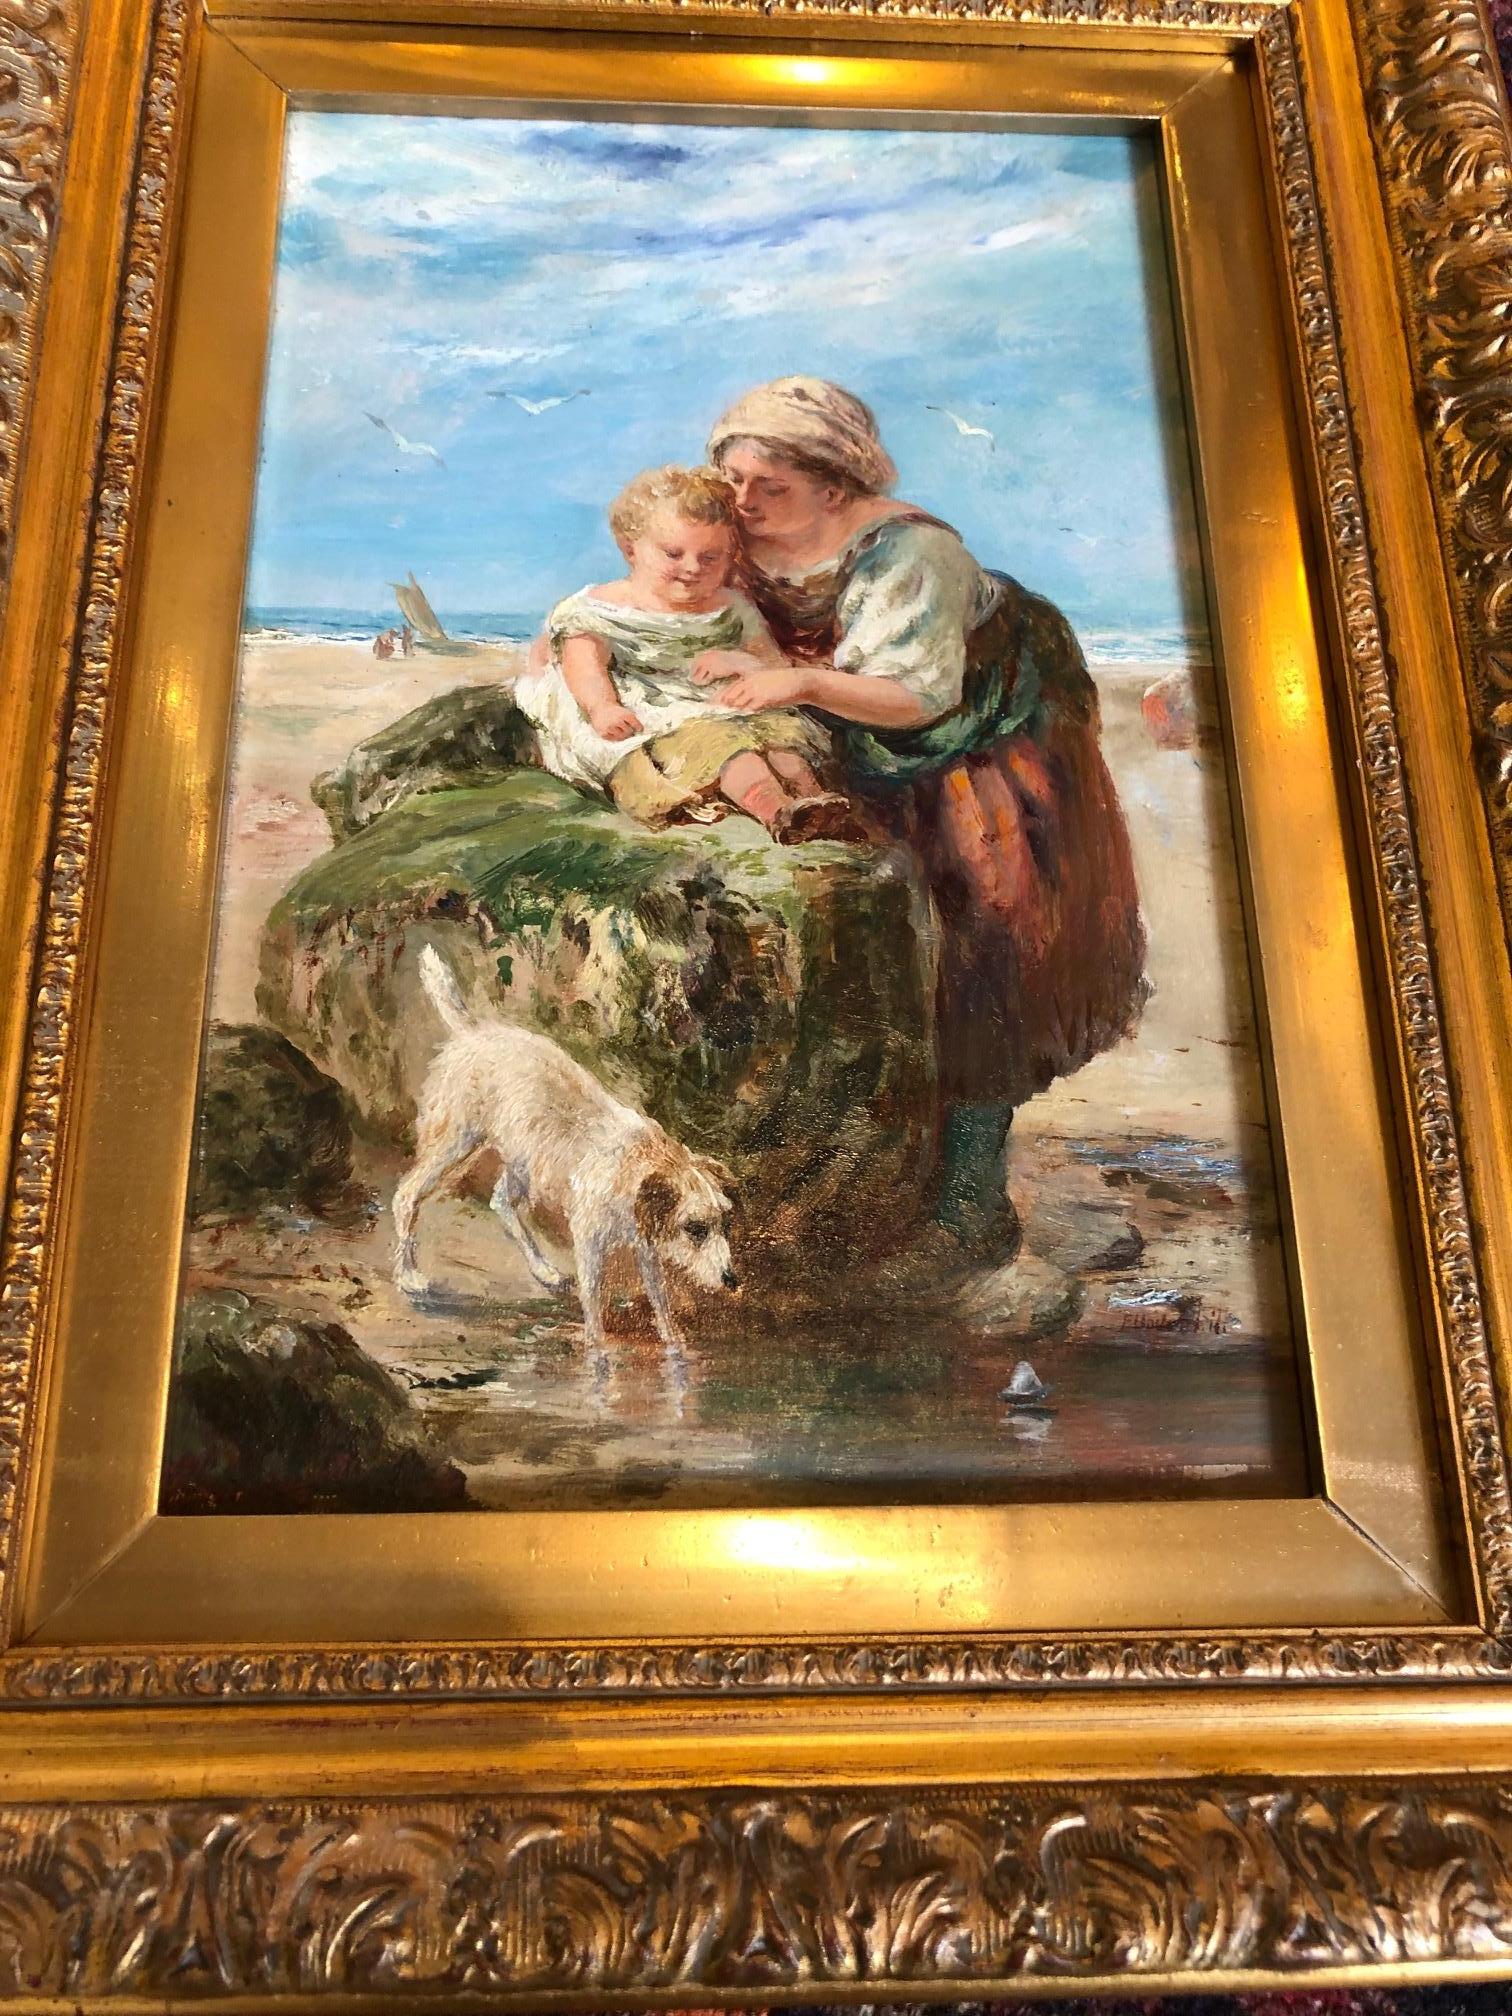 Victorian Oil Painting "Mother and Child Rockpooling at Beach with cute dog" - Art by Frederick Thomas Charles Underhill